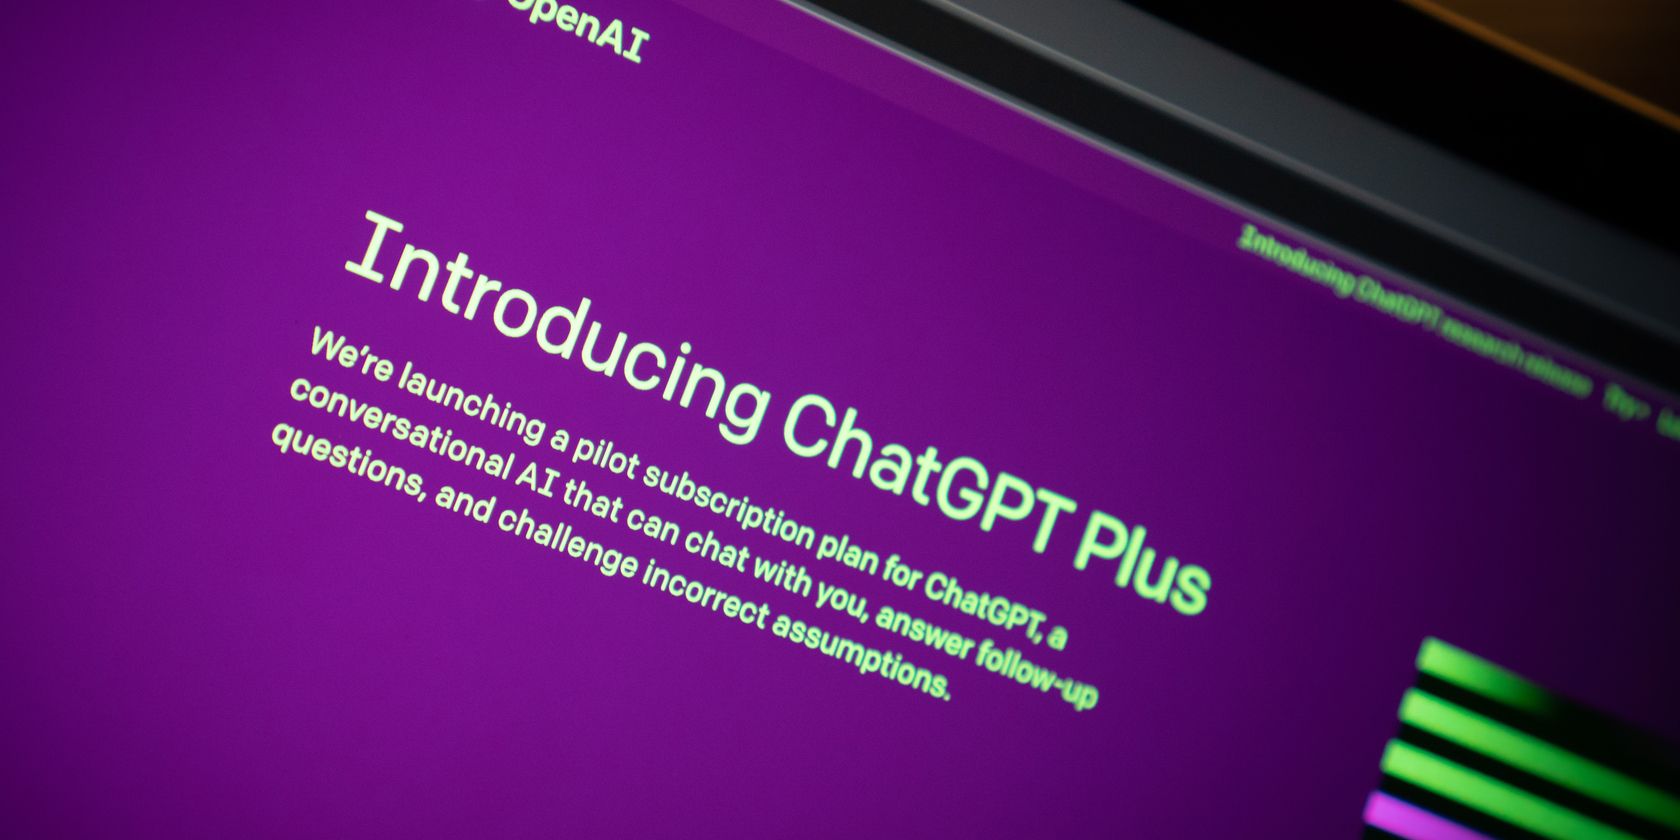 introducing chatgpt plus on laptop screen feature